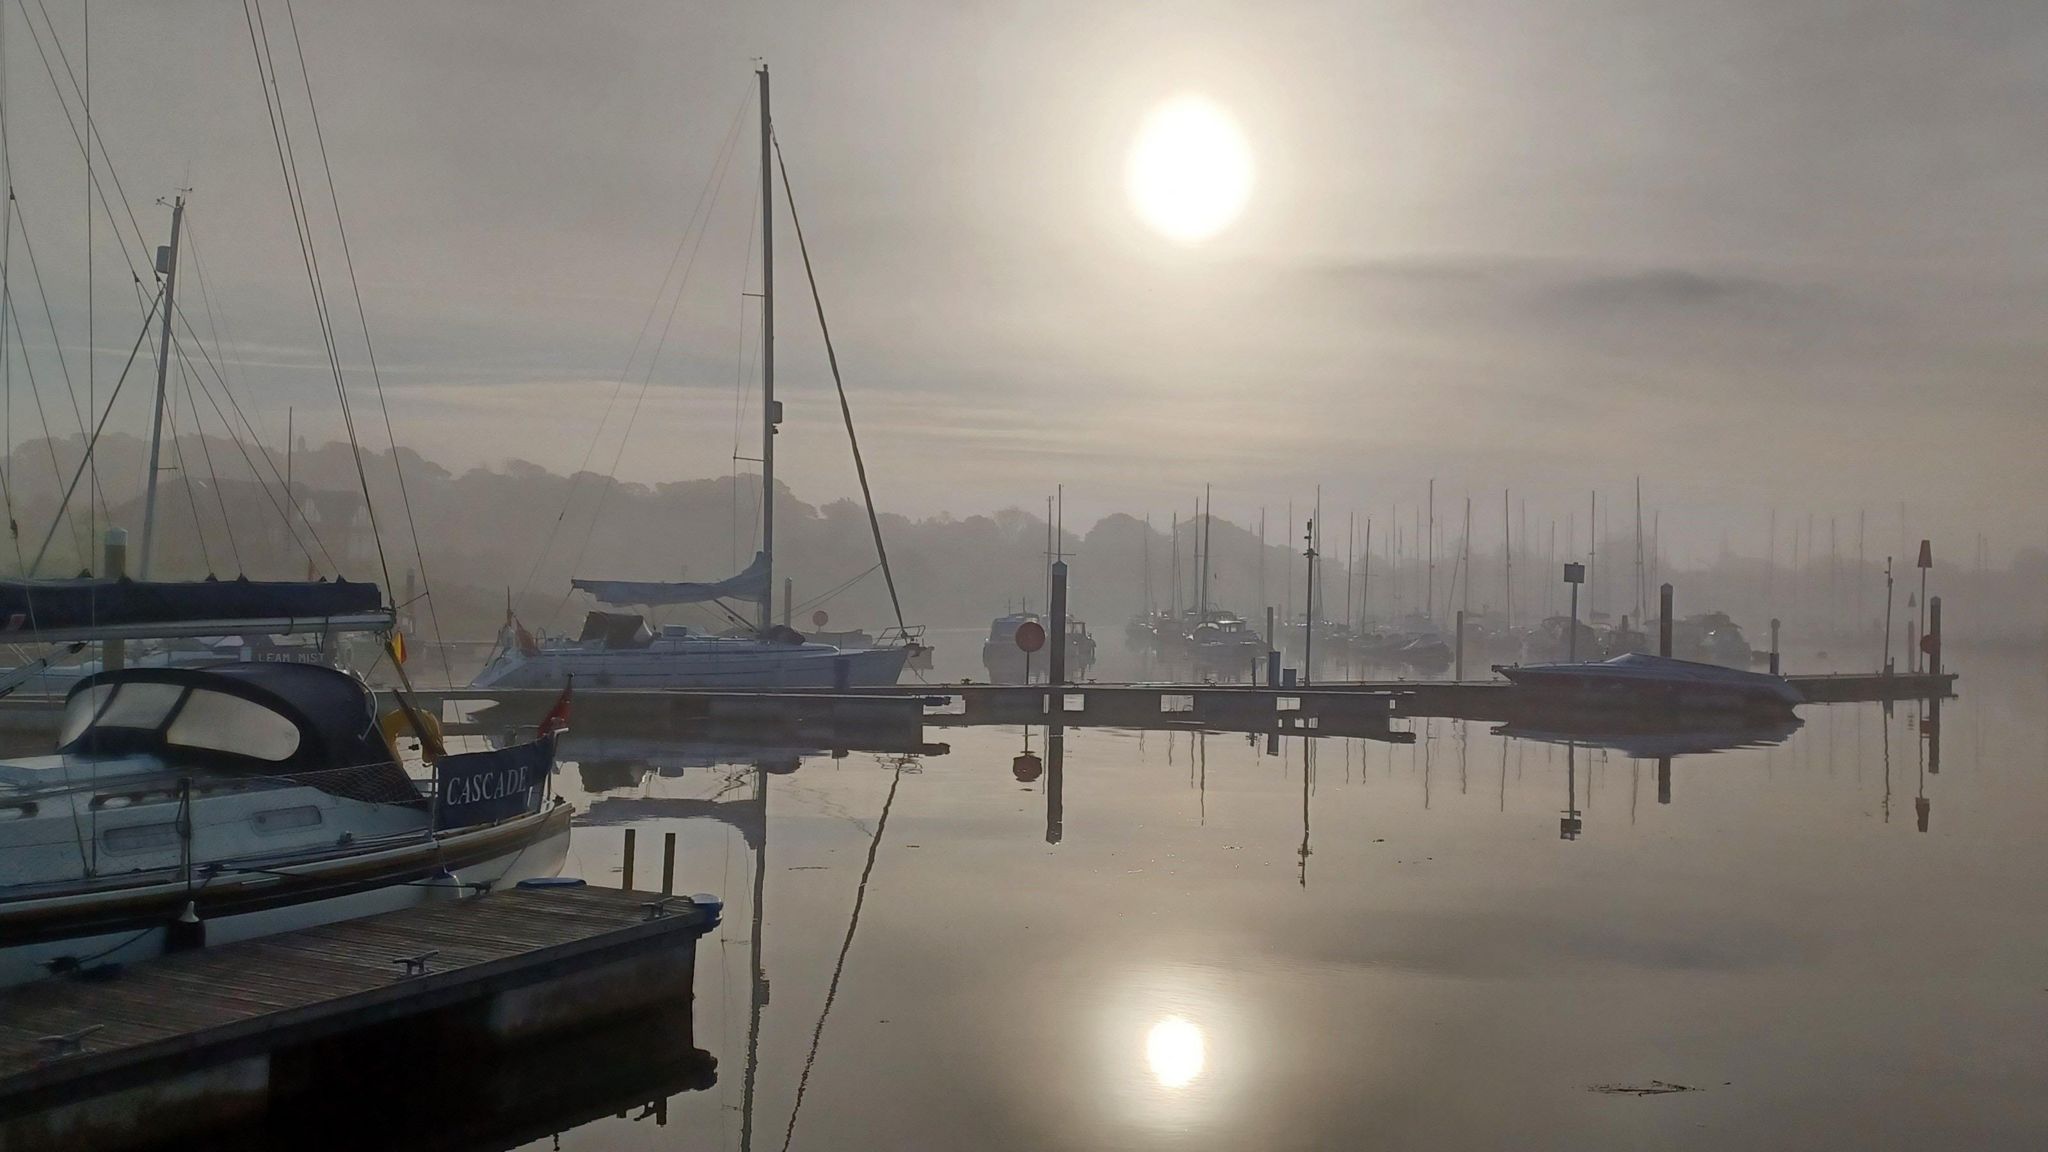 MONDAY - Misty sunlight over Lymington Quay, showing several boats and yachts